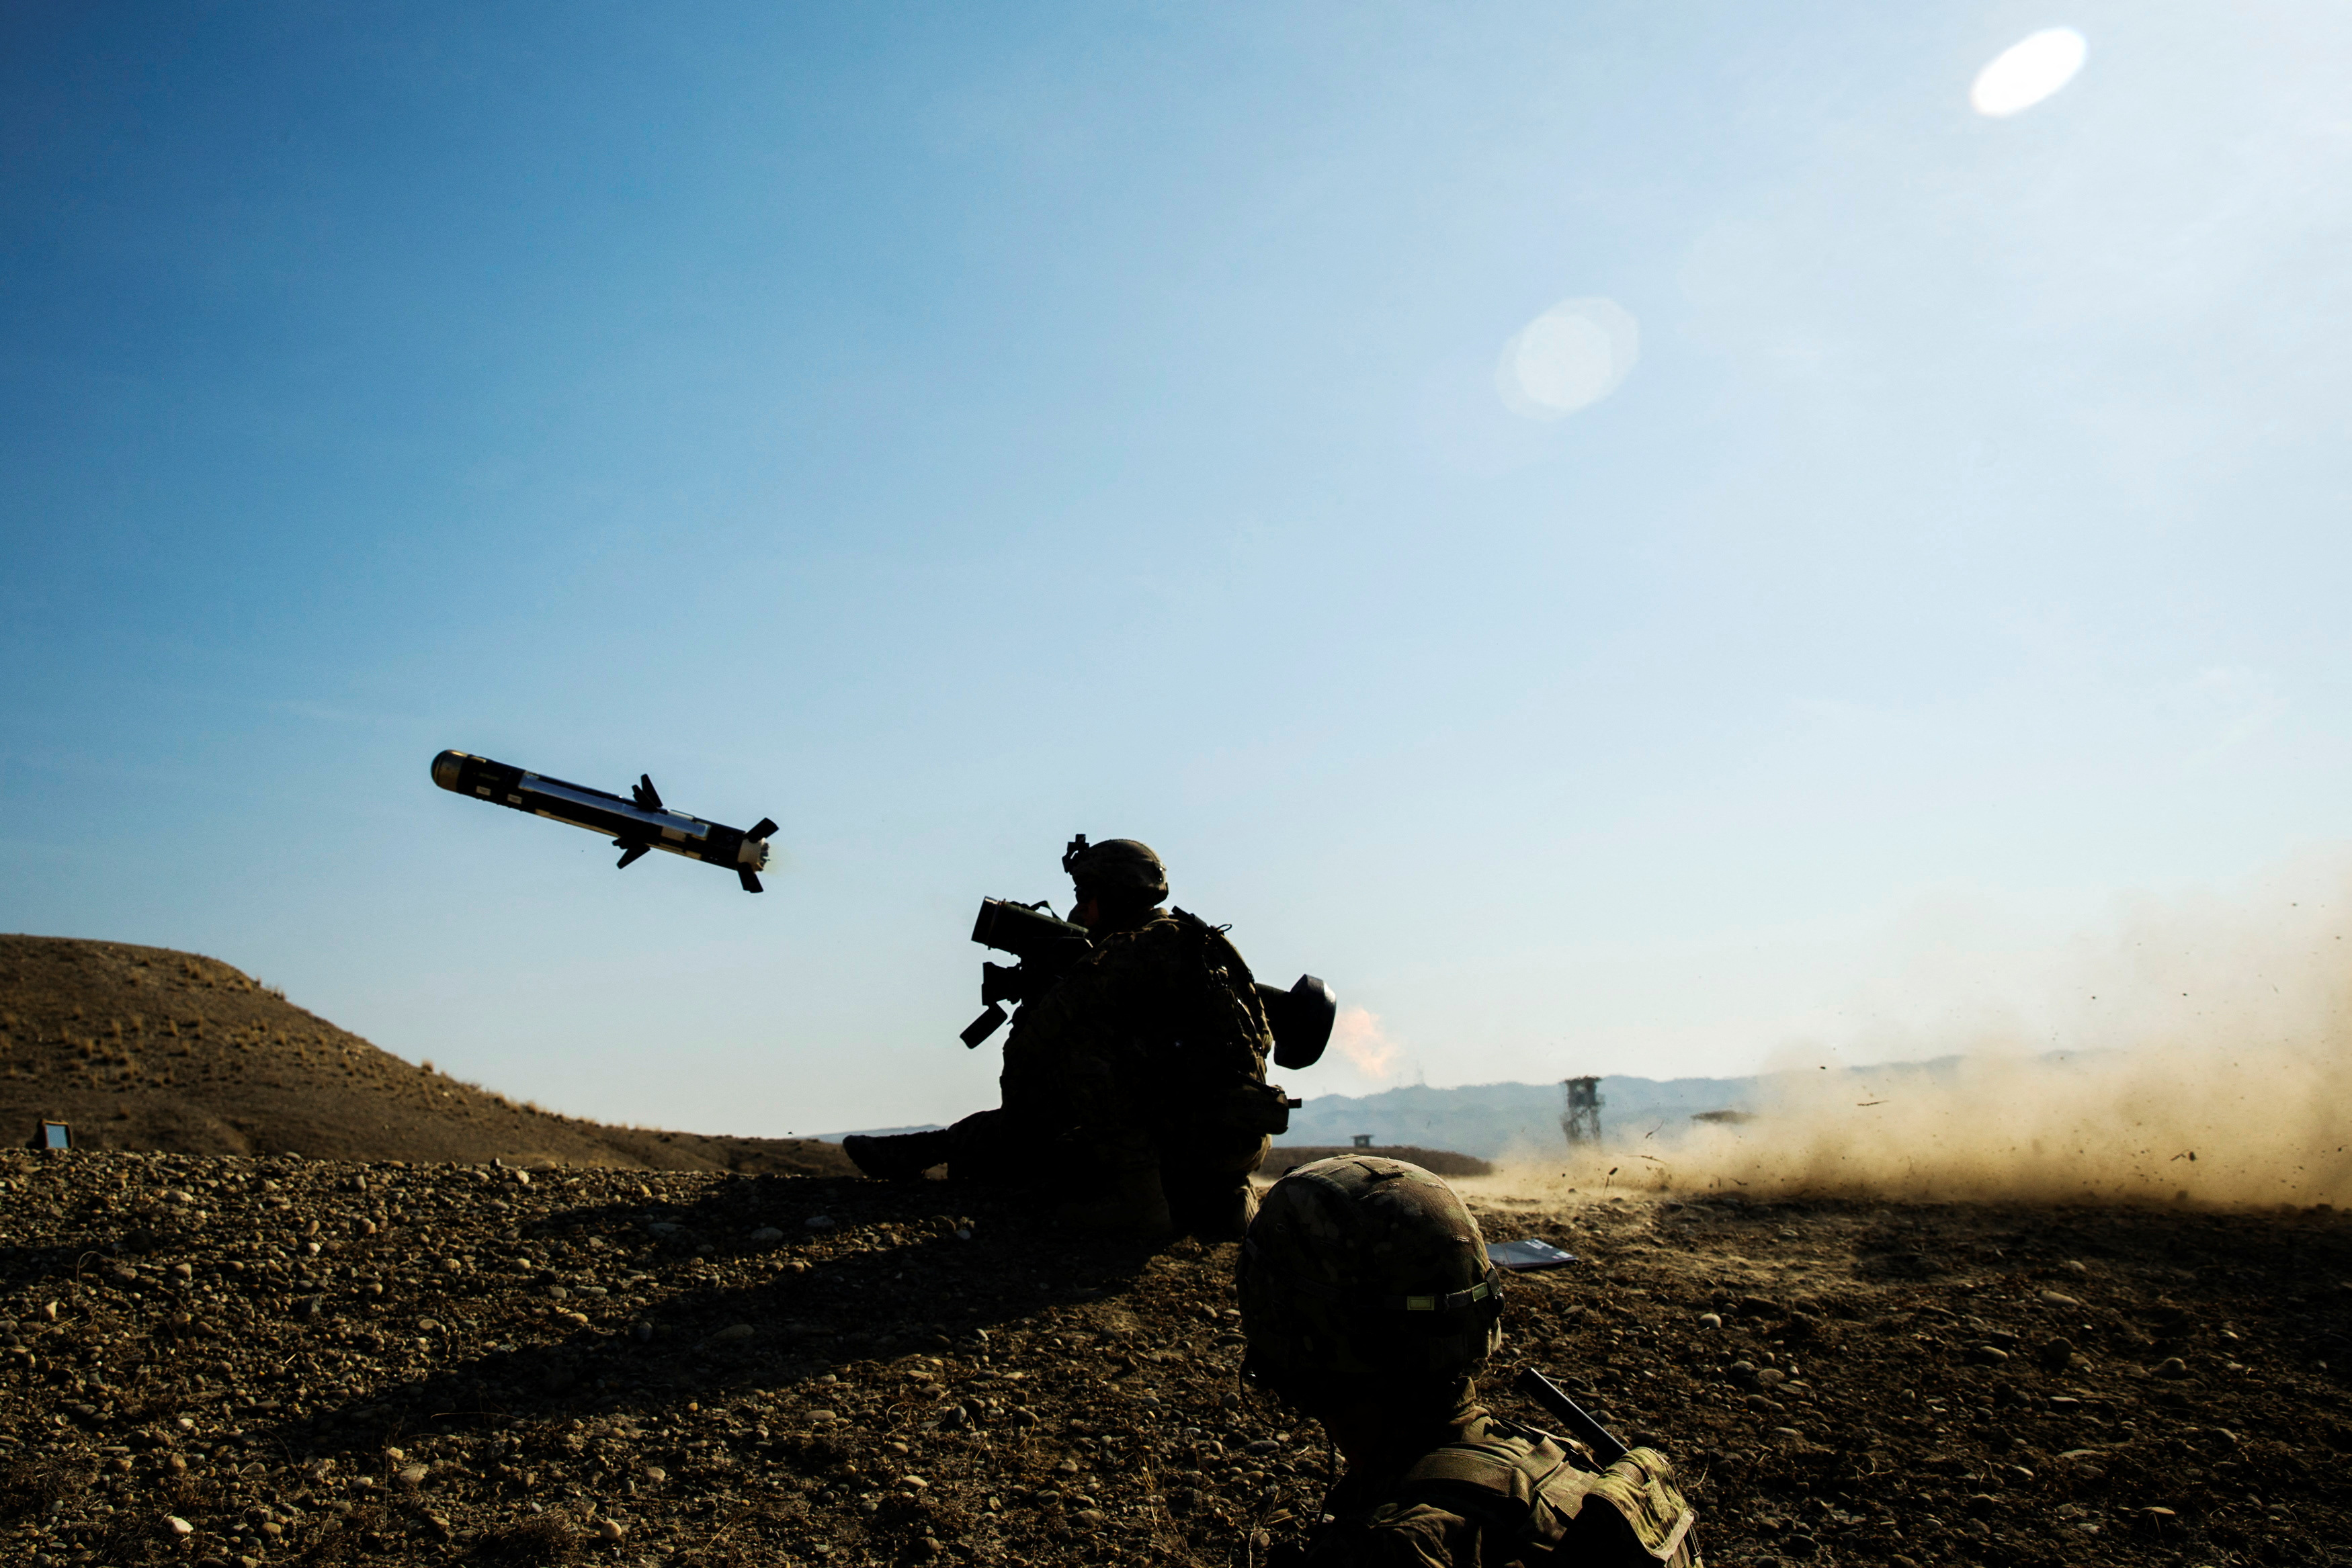 U.S. soldier from Dragon Troop of the 3rd Cavalry Regiment fires a Javelin missile system during their first training exercise of the new year near operating base Gamberi in the Laghman province of Afghanistan